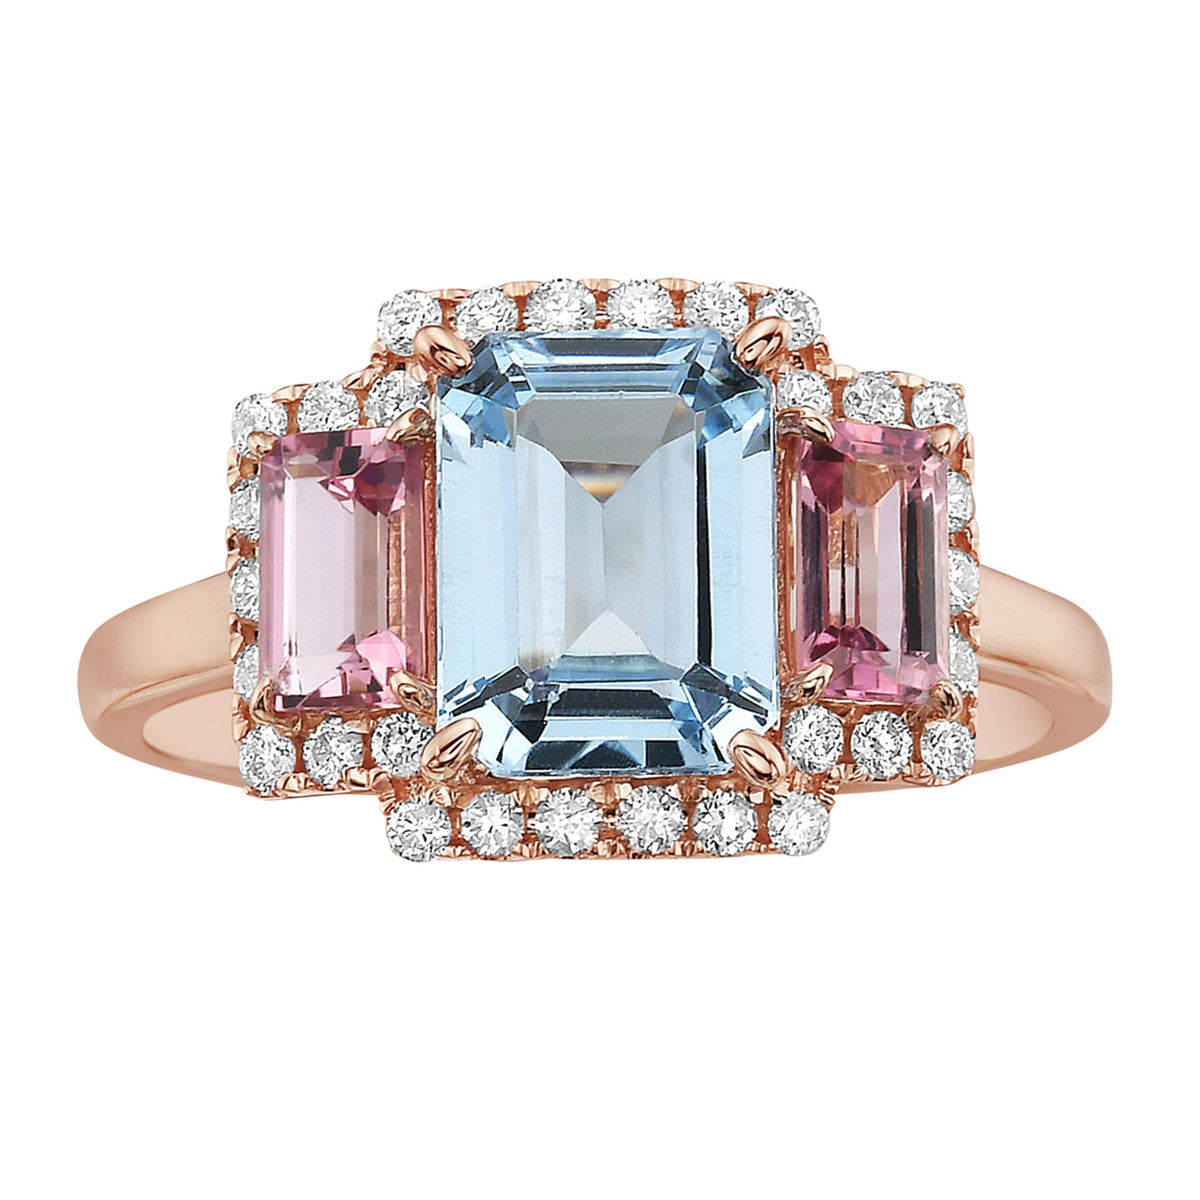 18K Rose Gold 3-Stone Ring with 2.25ct Blue Topaz and 2=.60cttw Pink Tourmaline with .24cttw Natural Diamonds - Size 6.5